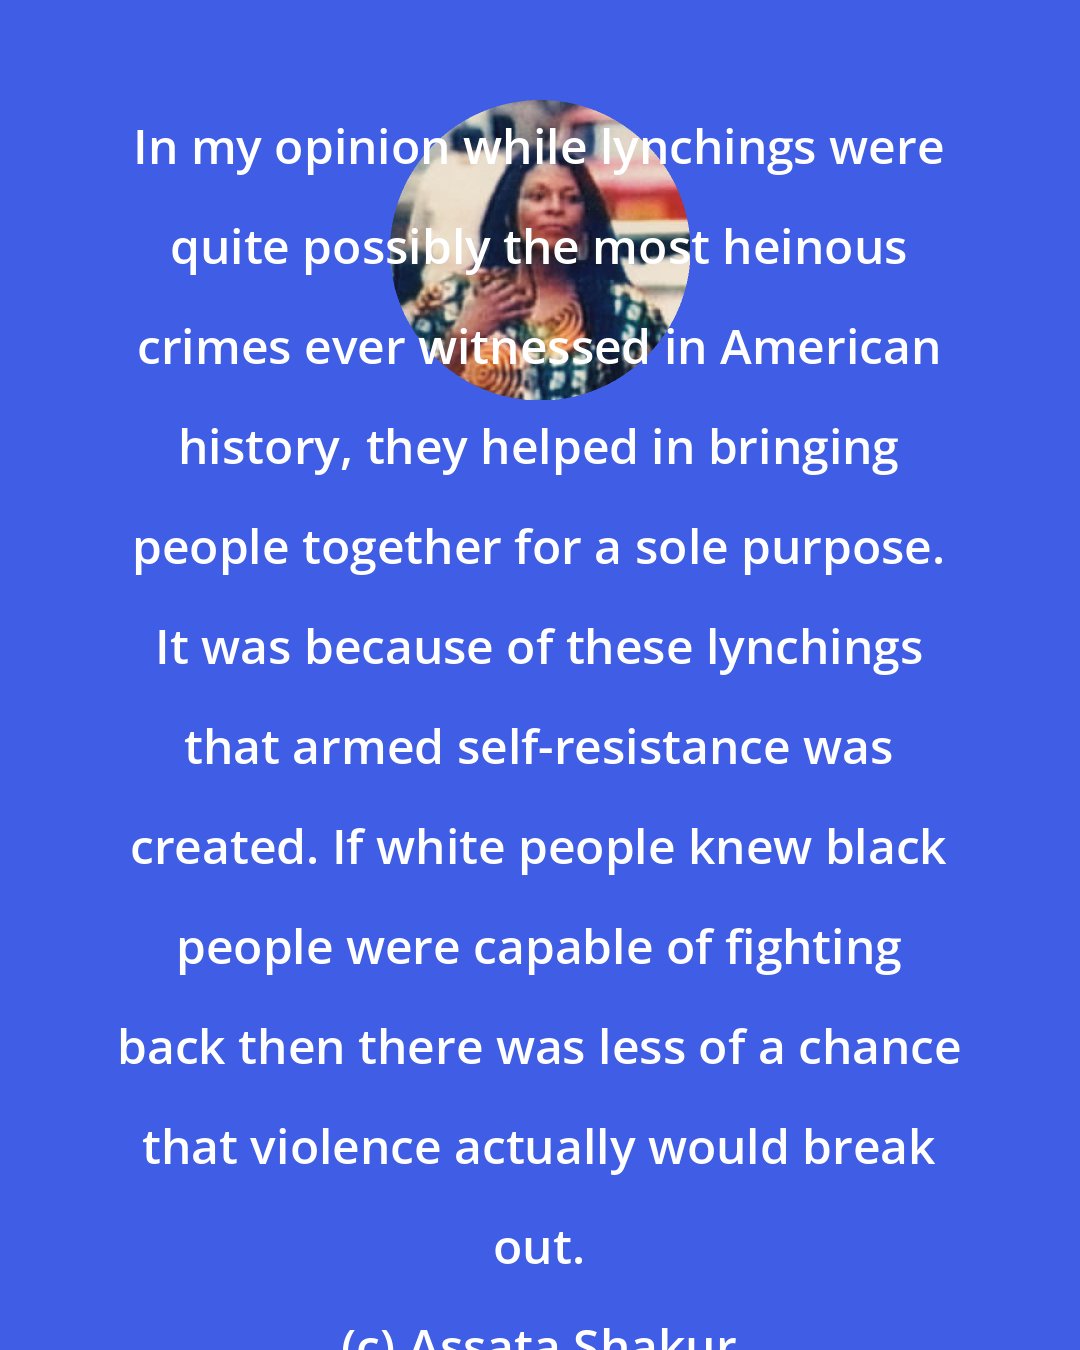 Assata Shakur: In my opinion while lynchings were quite possibly the most heinous crimes ever witnessed in American history, they helped in bringing people together for a sole purpose. It was because of these lynchings that armed self-resistance was created. If white people knew black people were capable of fighting back then there was less of a chance that violence actually would break out.